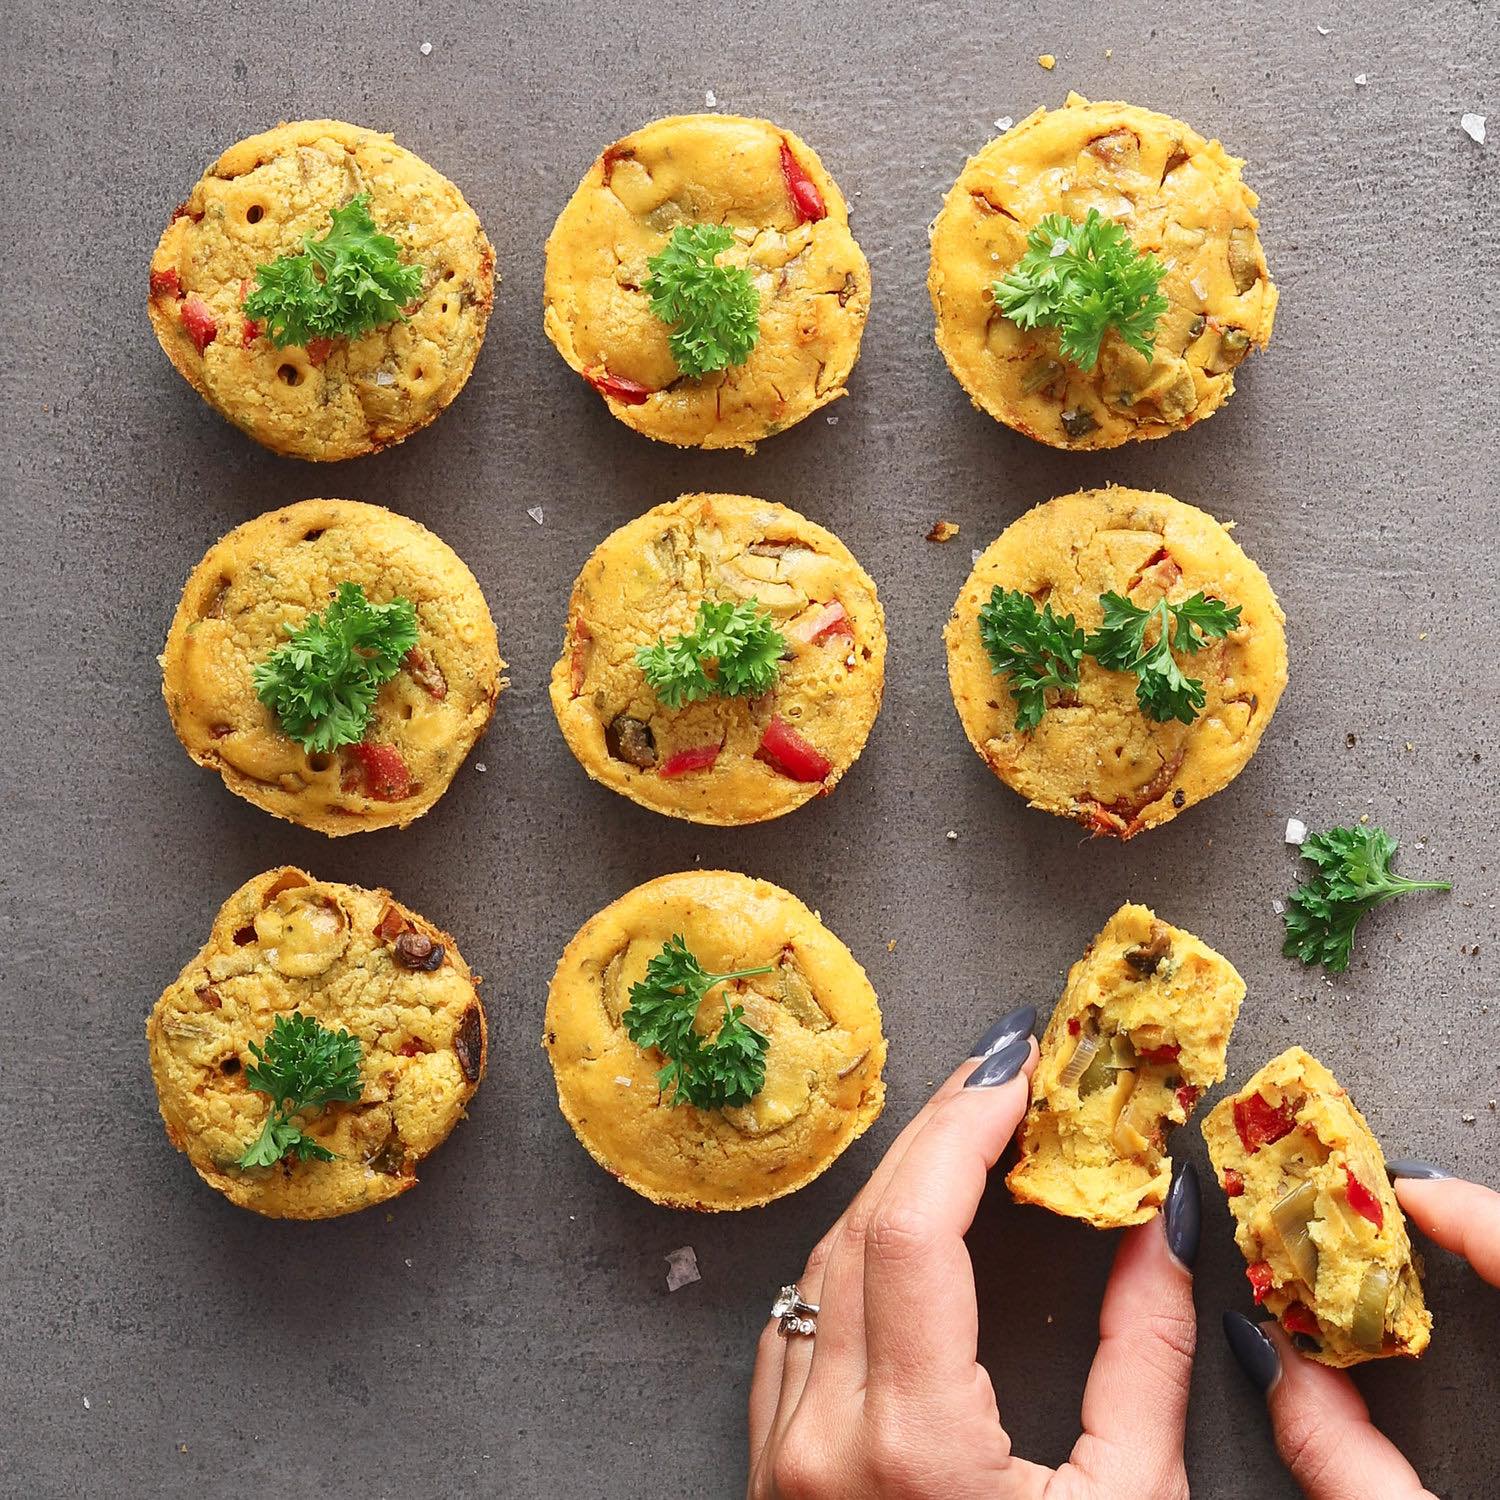 Chickpea Muffins